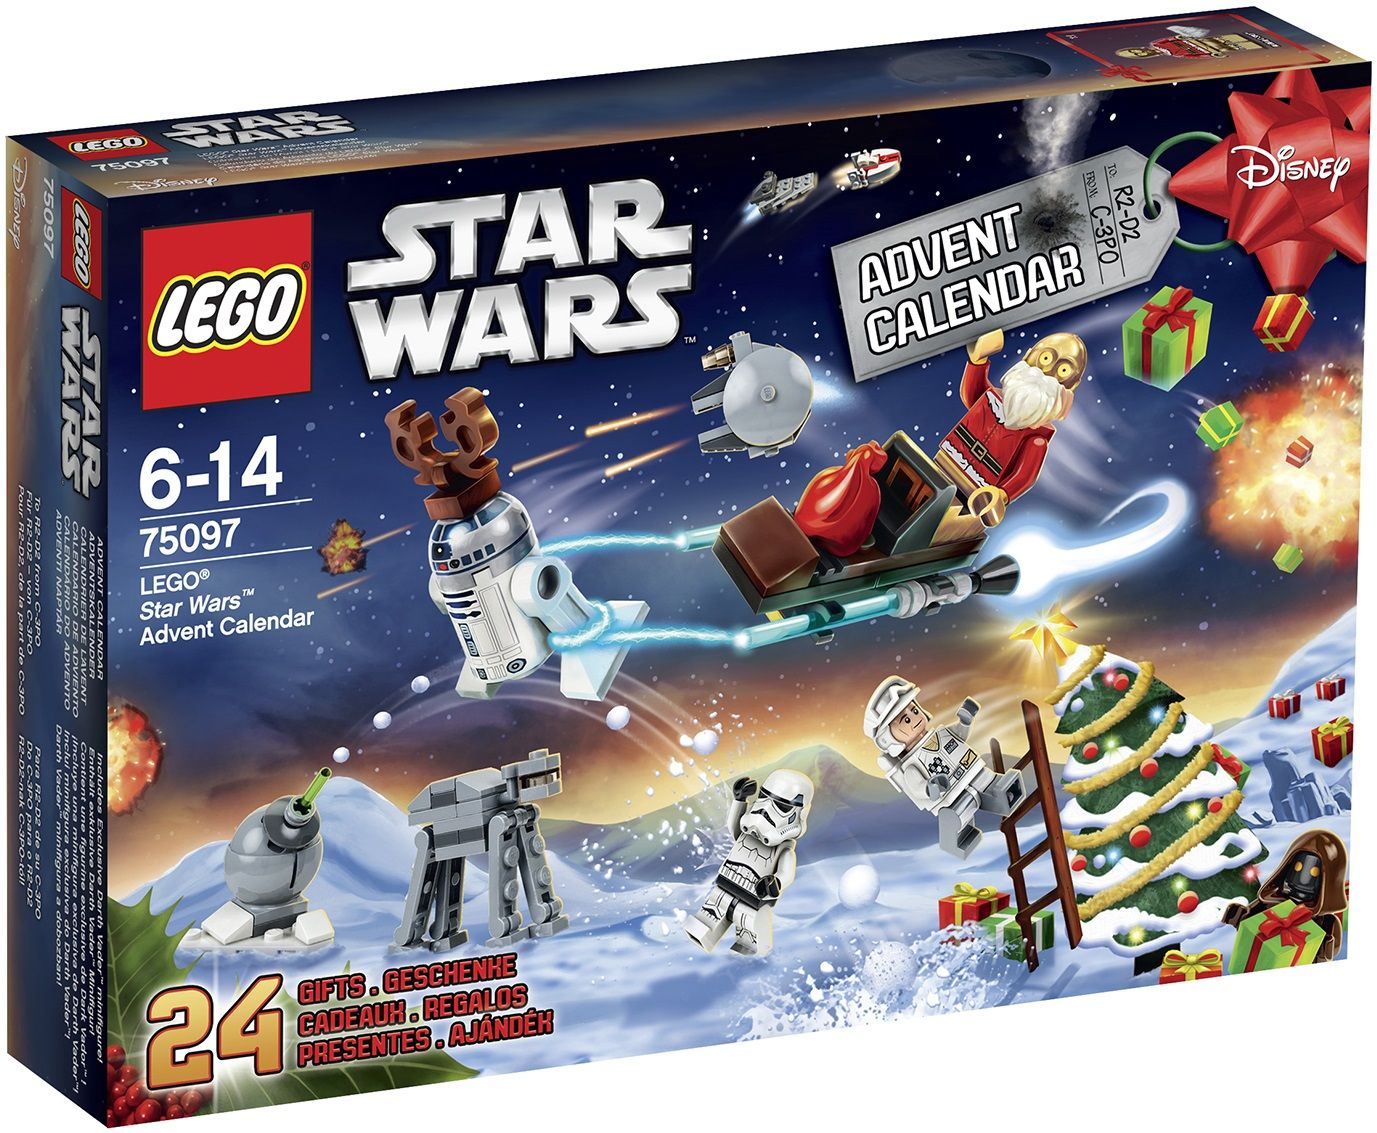 LEGO Star Wars The Force Awakens 2015 Sets Geek Culture